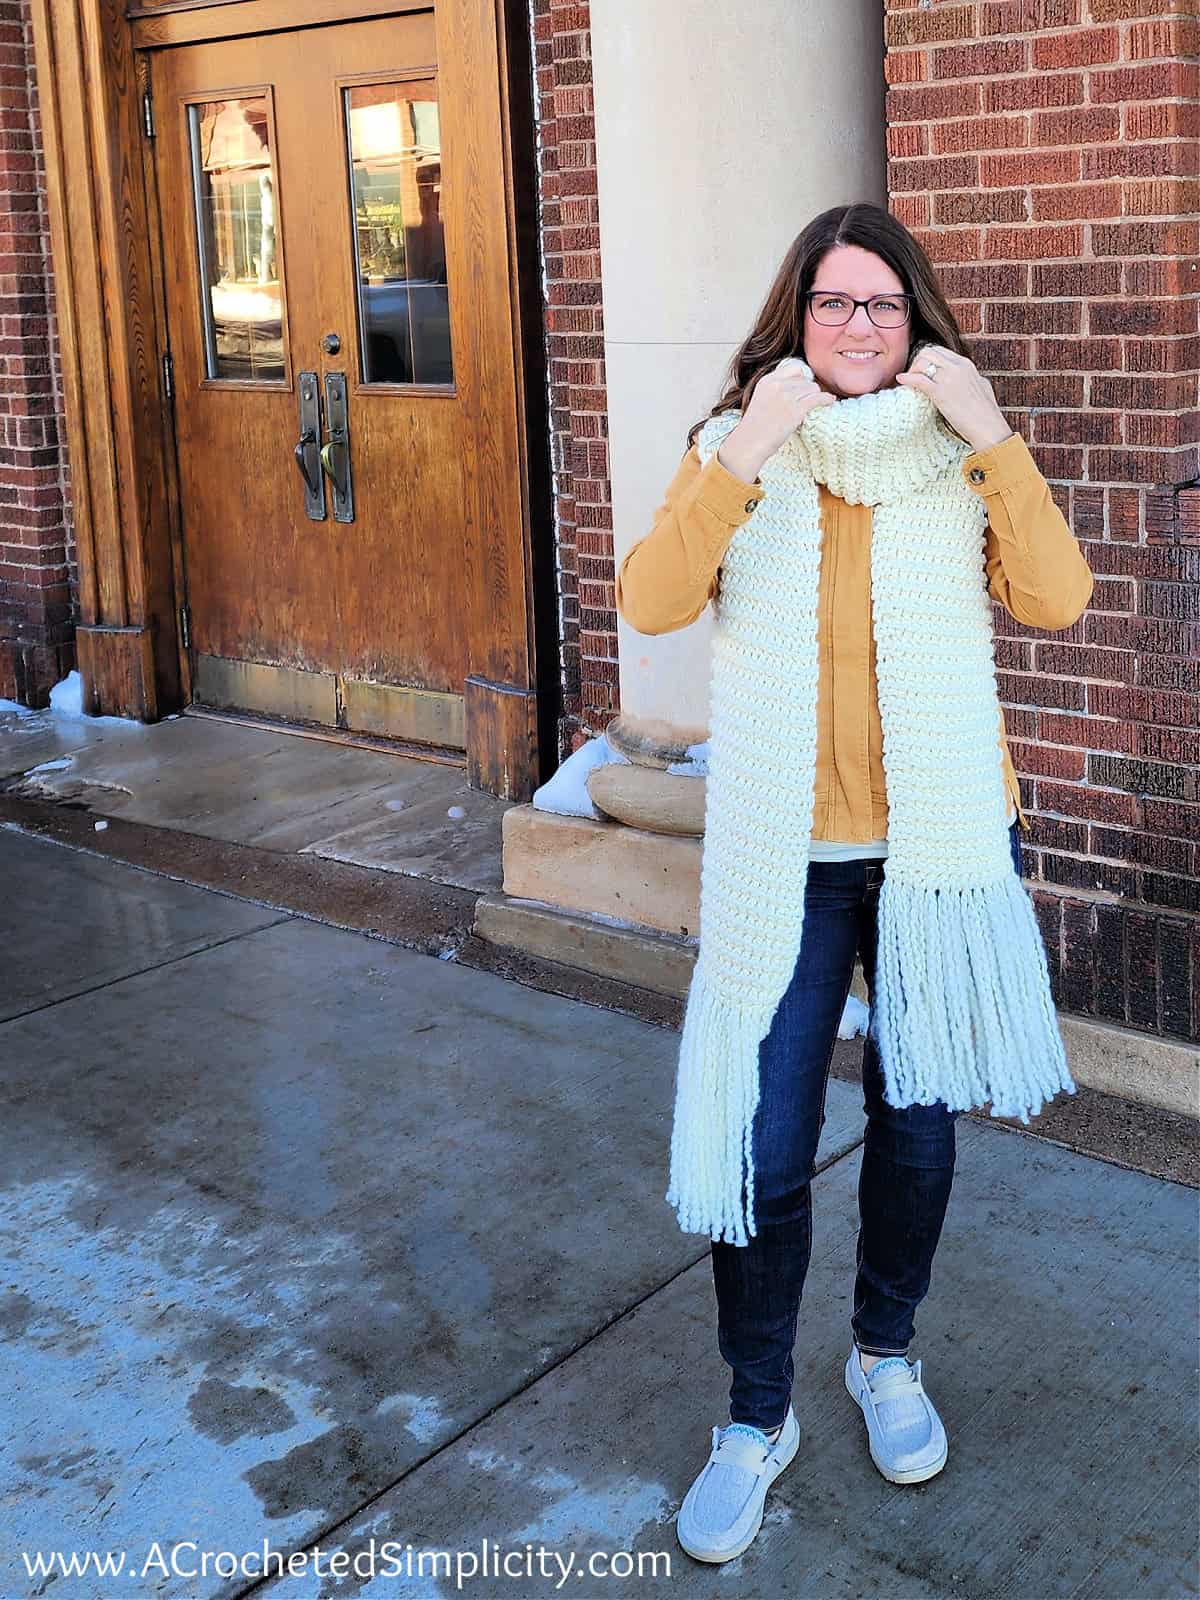 Woman modeling cream color knit look crochet scarf in front of a brick building.